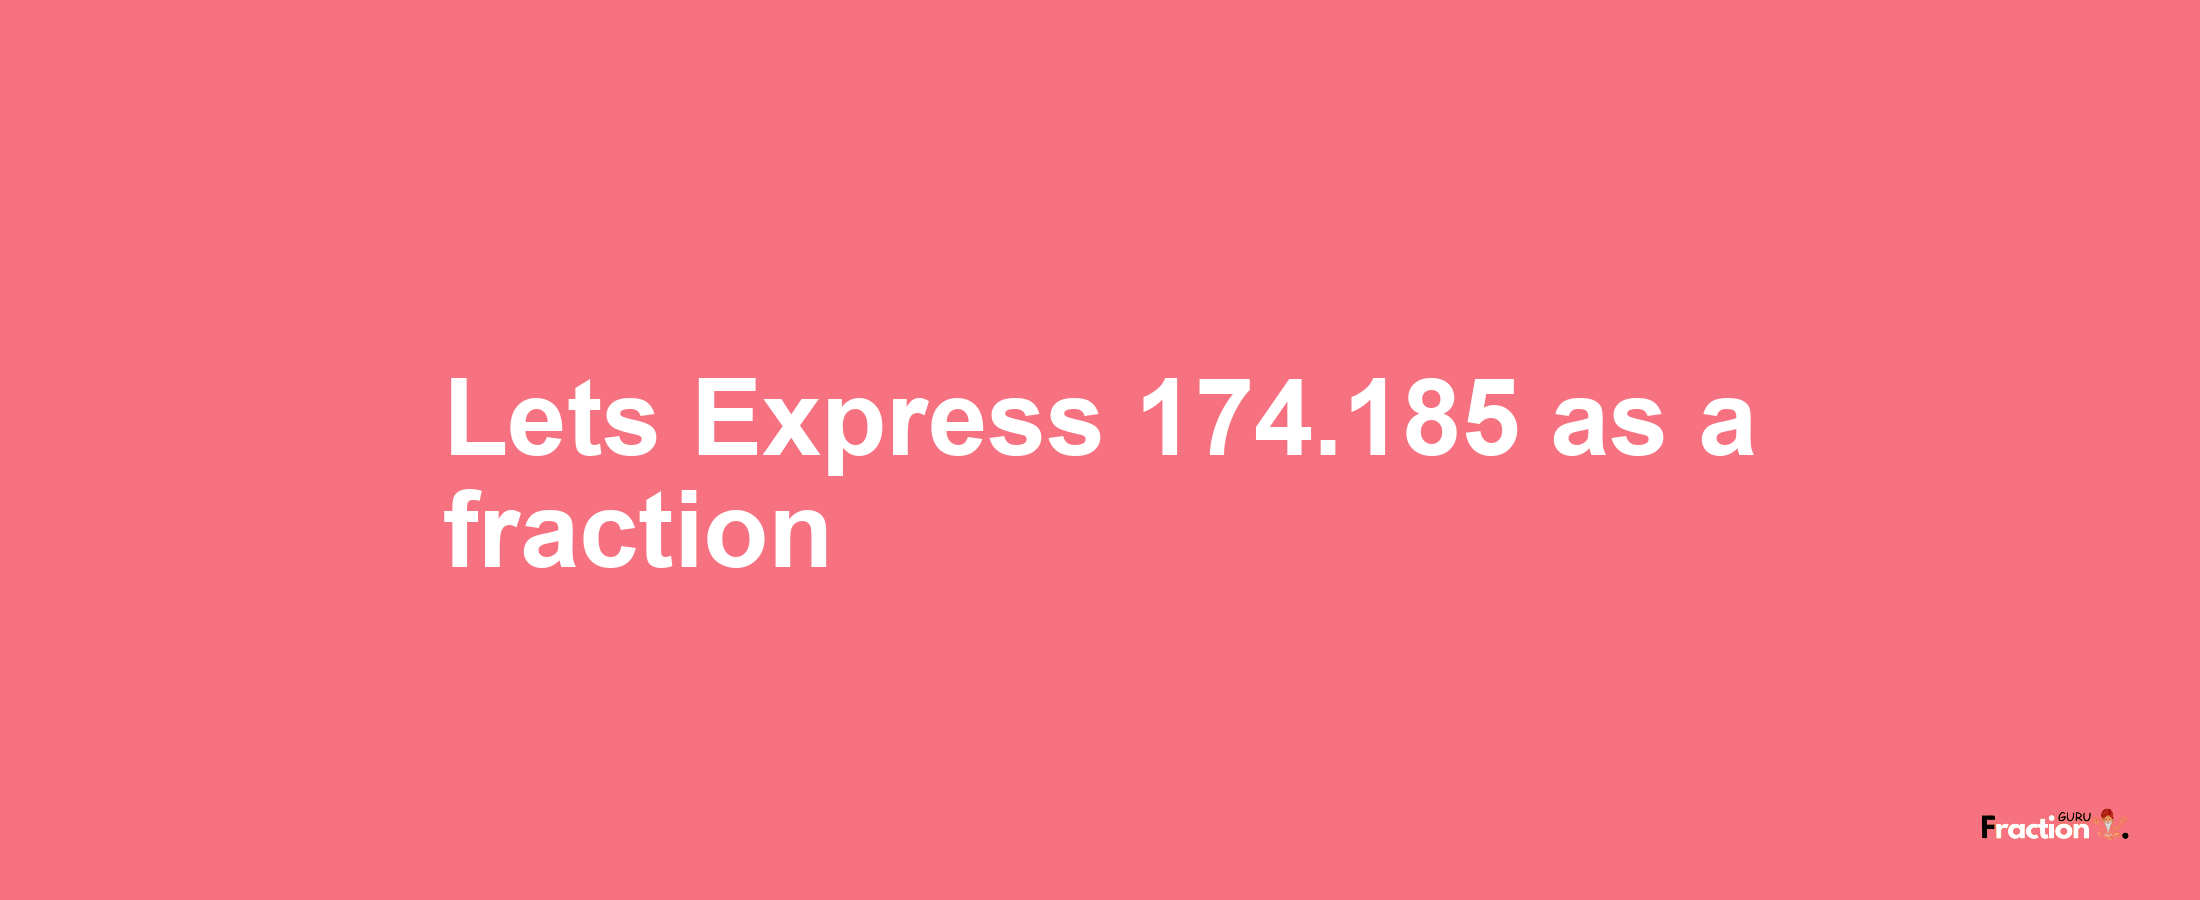 Lets Express 174.185 as afraction